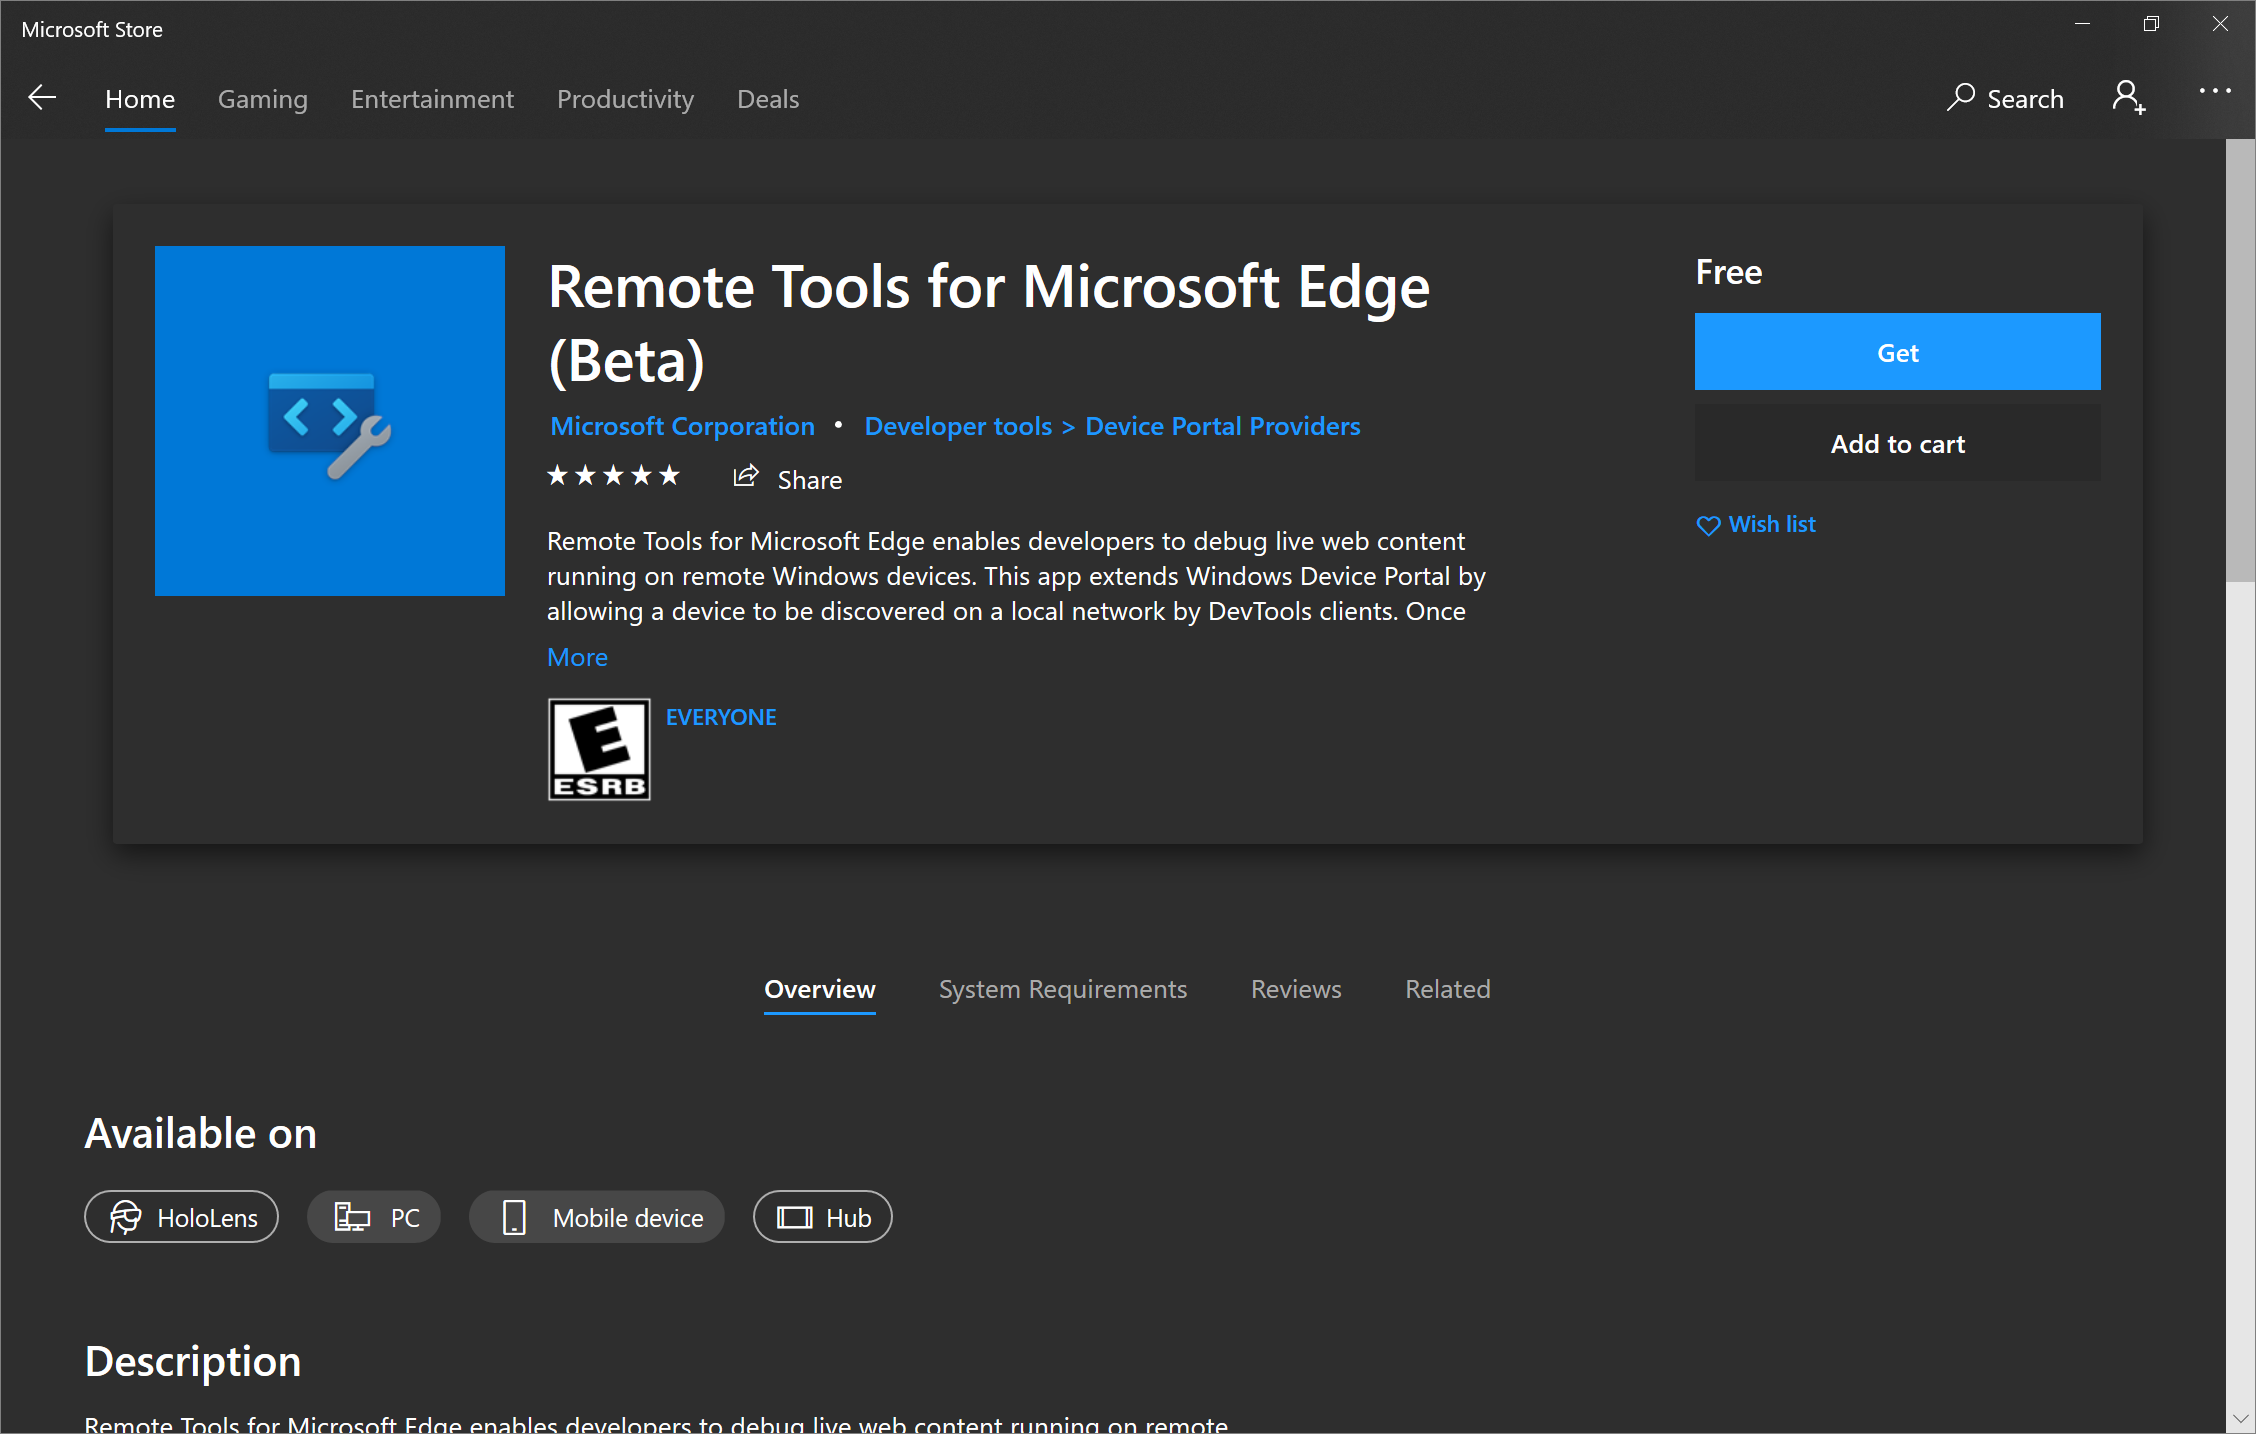 The Remote Tools for Microsoft Edge (Beta) app available in the Microsoft Store